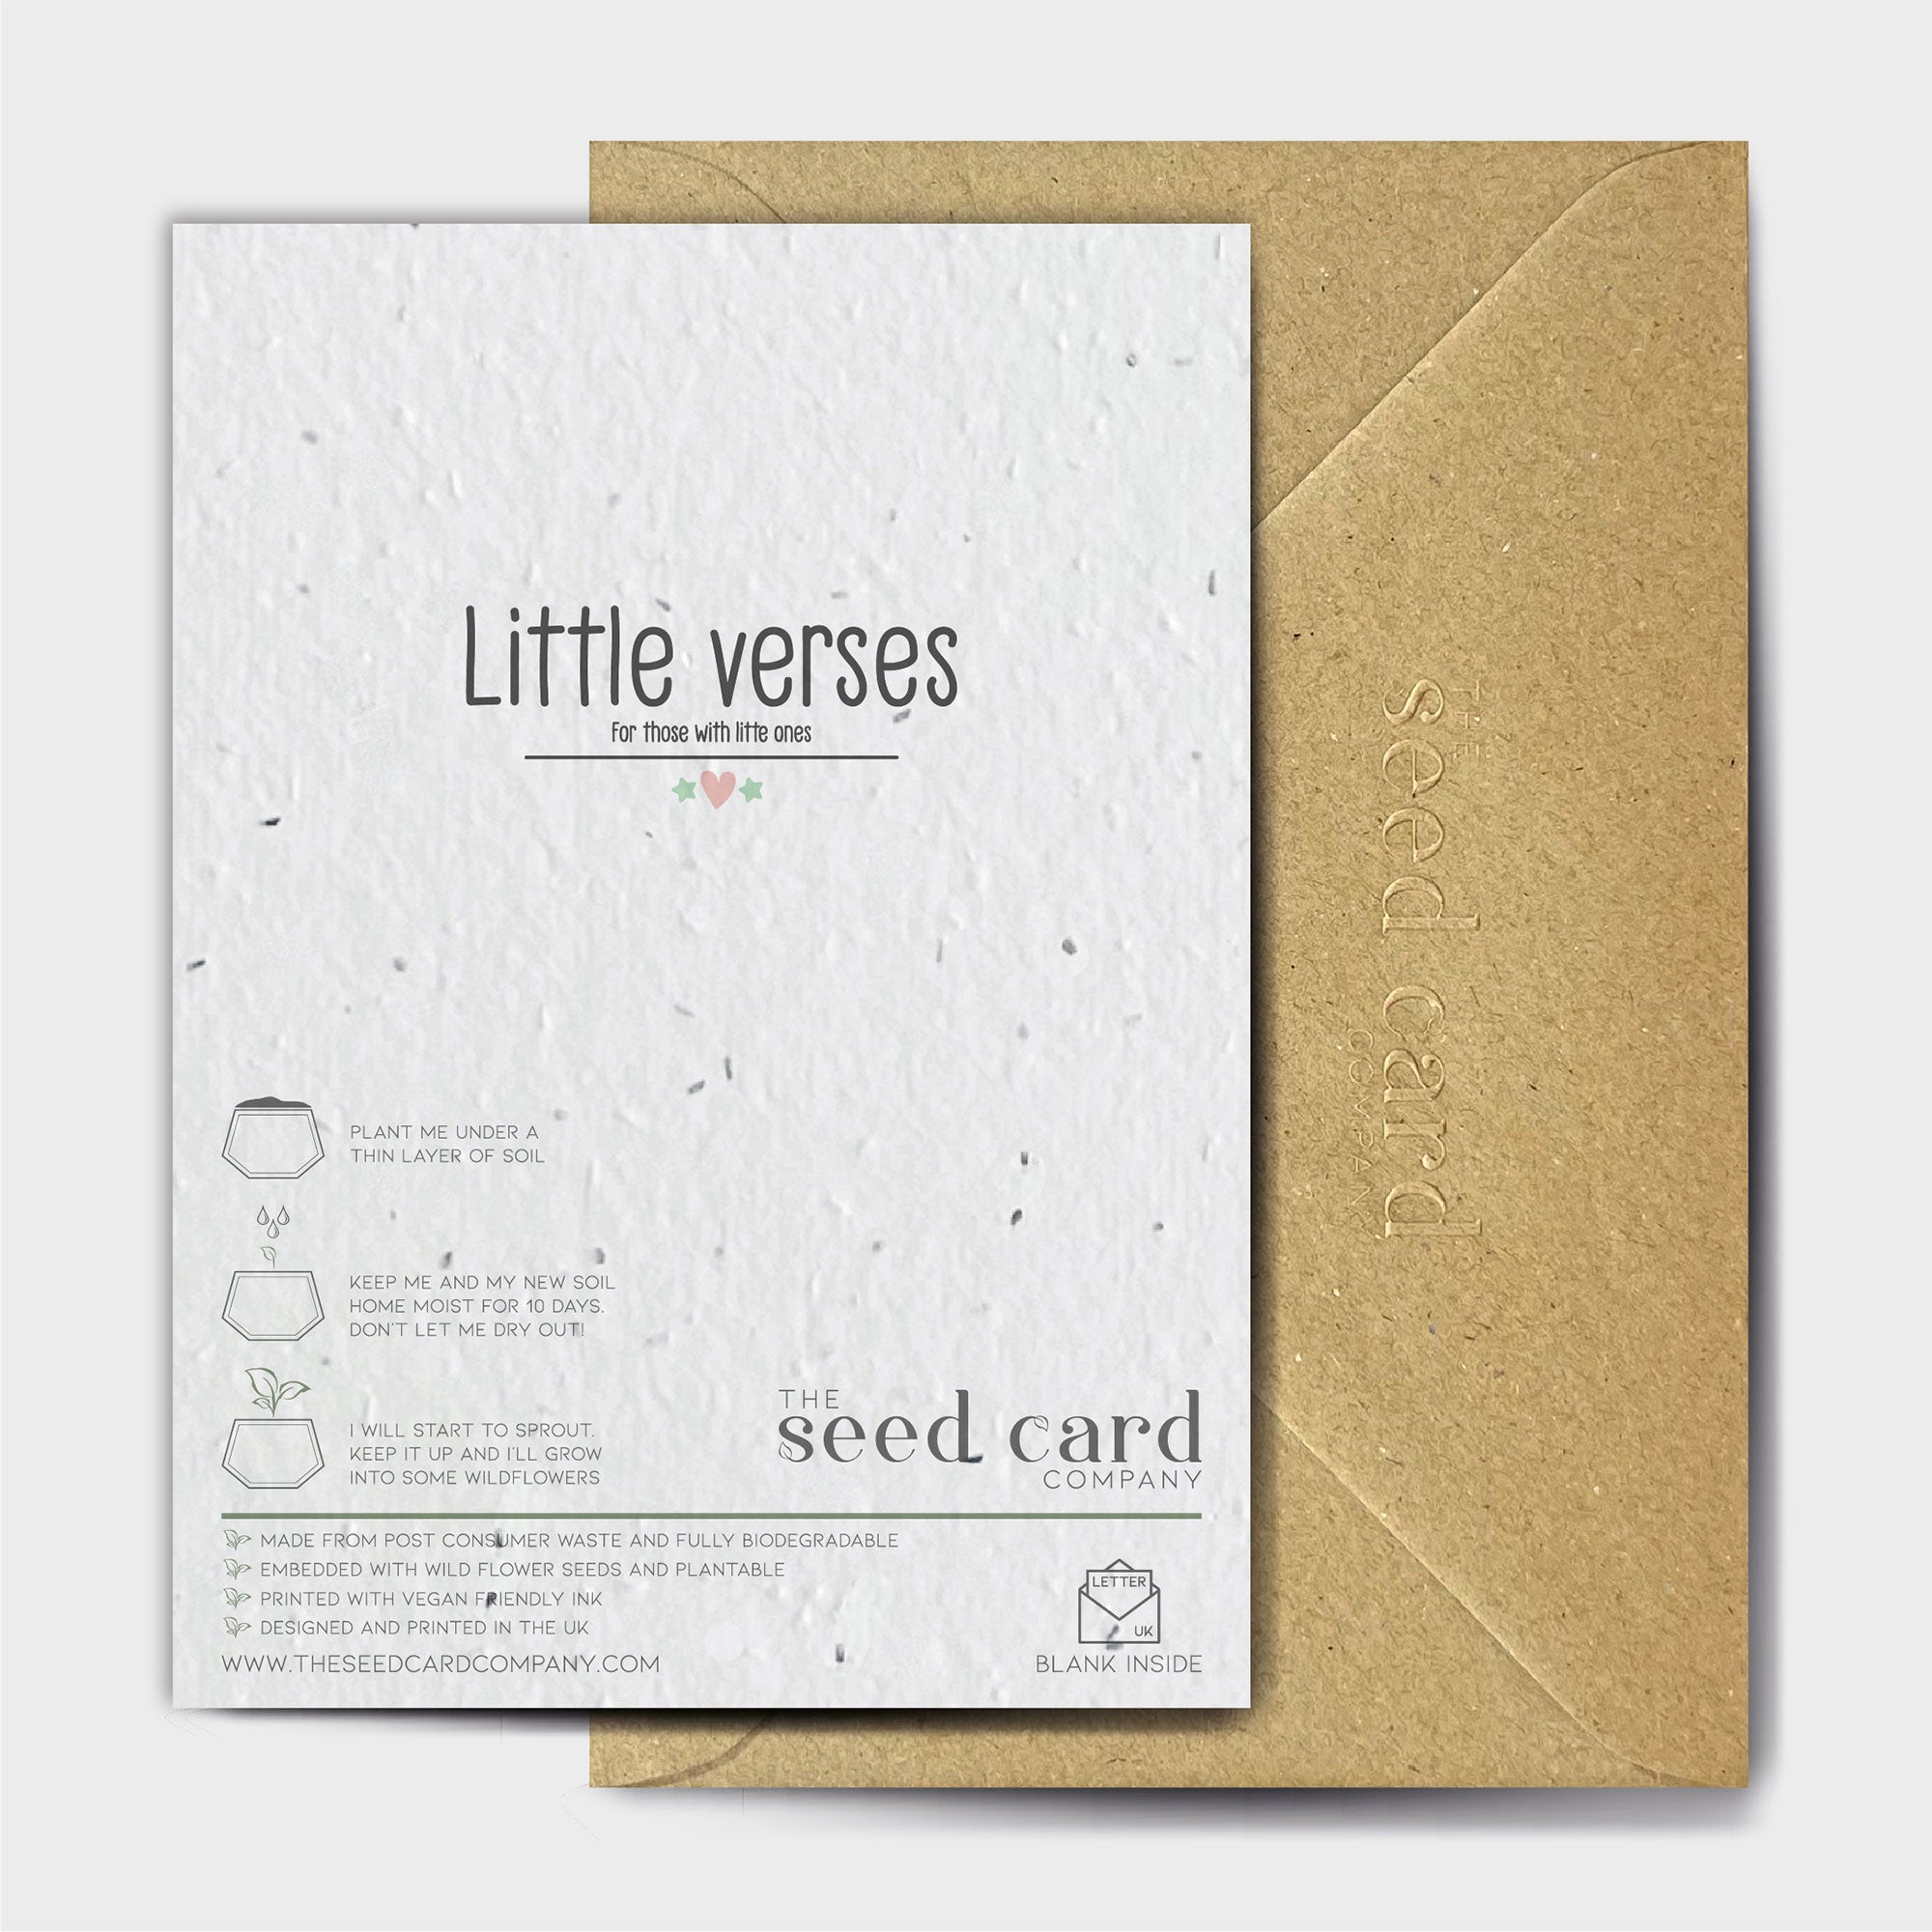 Shop online Row Row Your Boat - 100% biodegradable seed-embedded cards Shop -The Seed Card Company